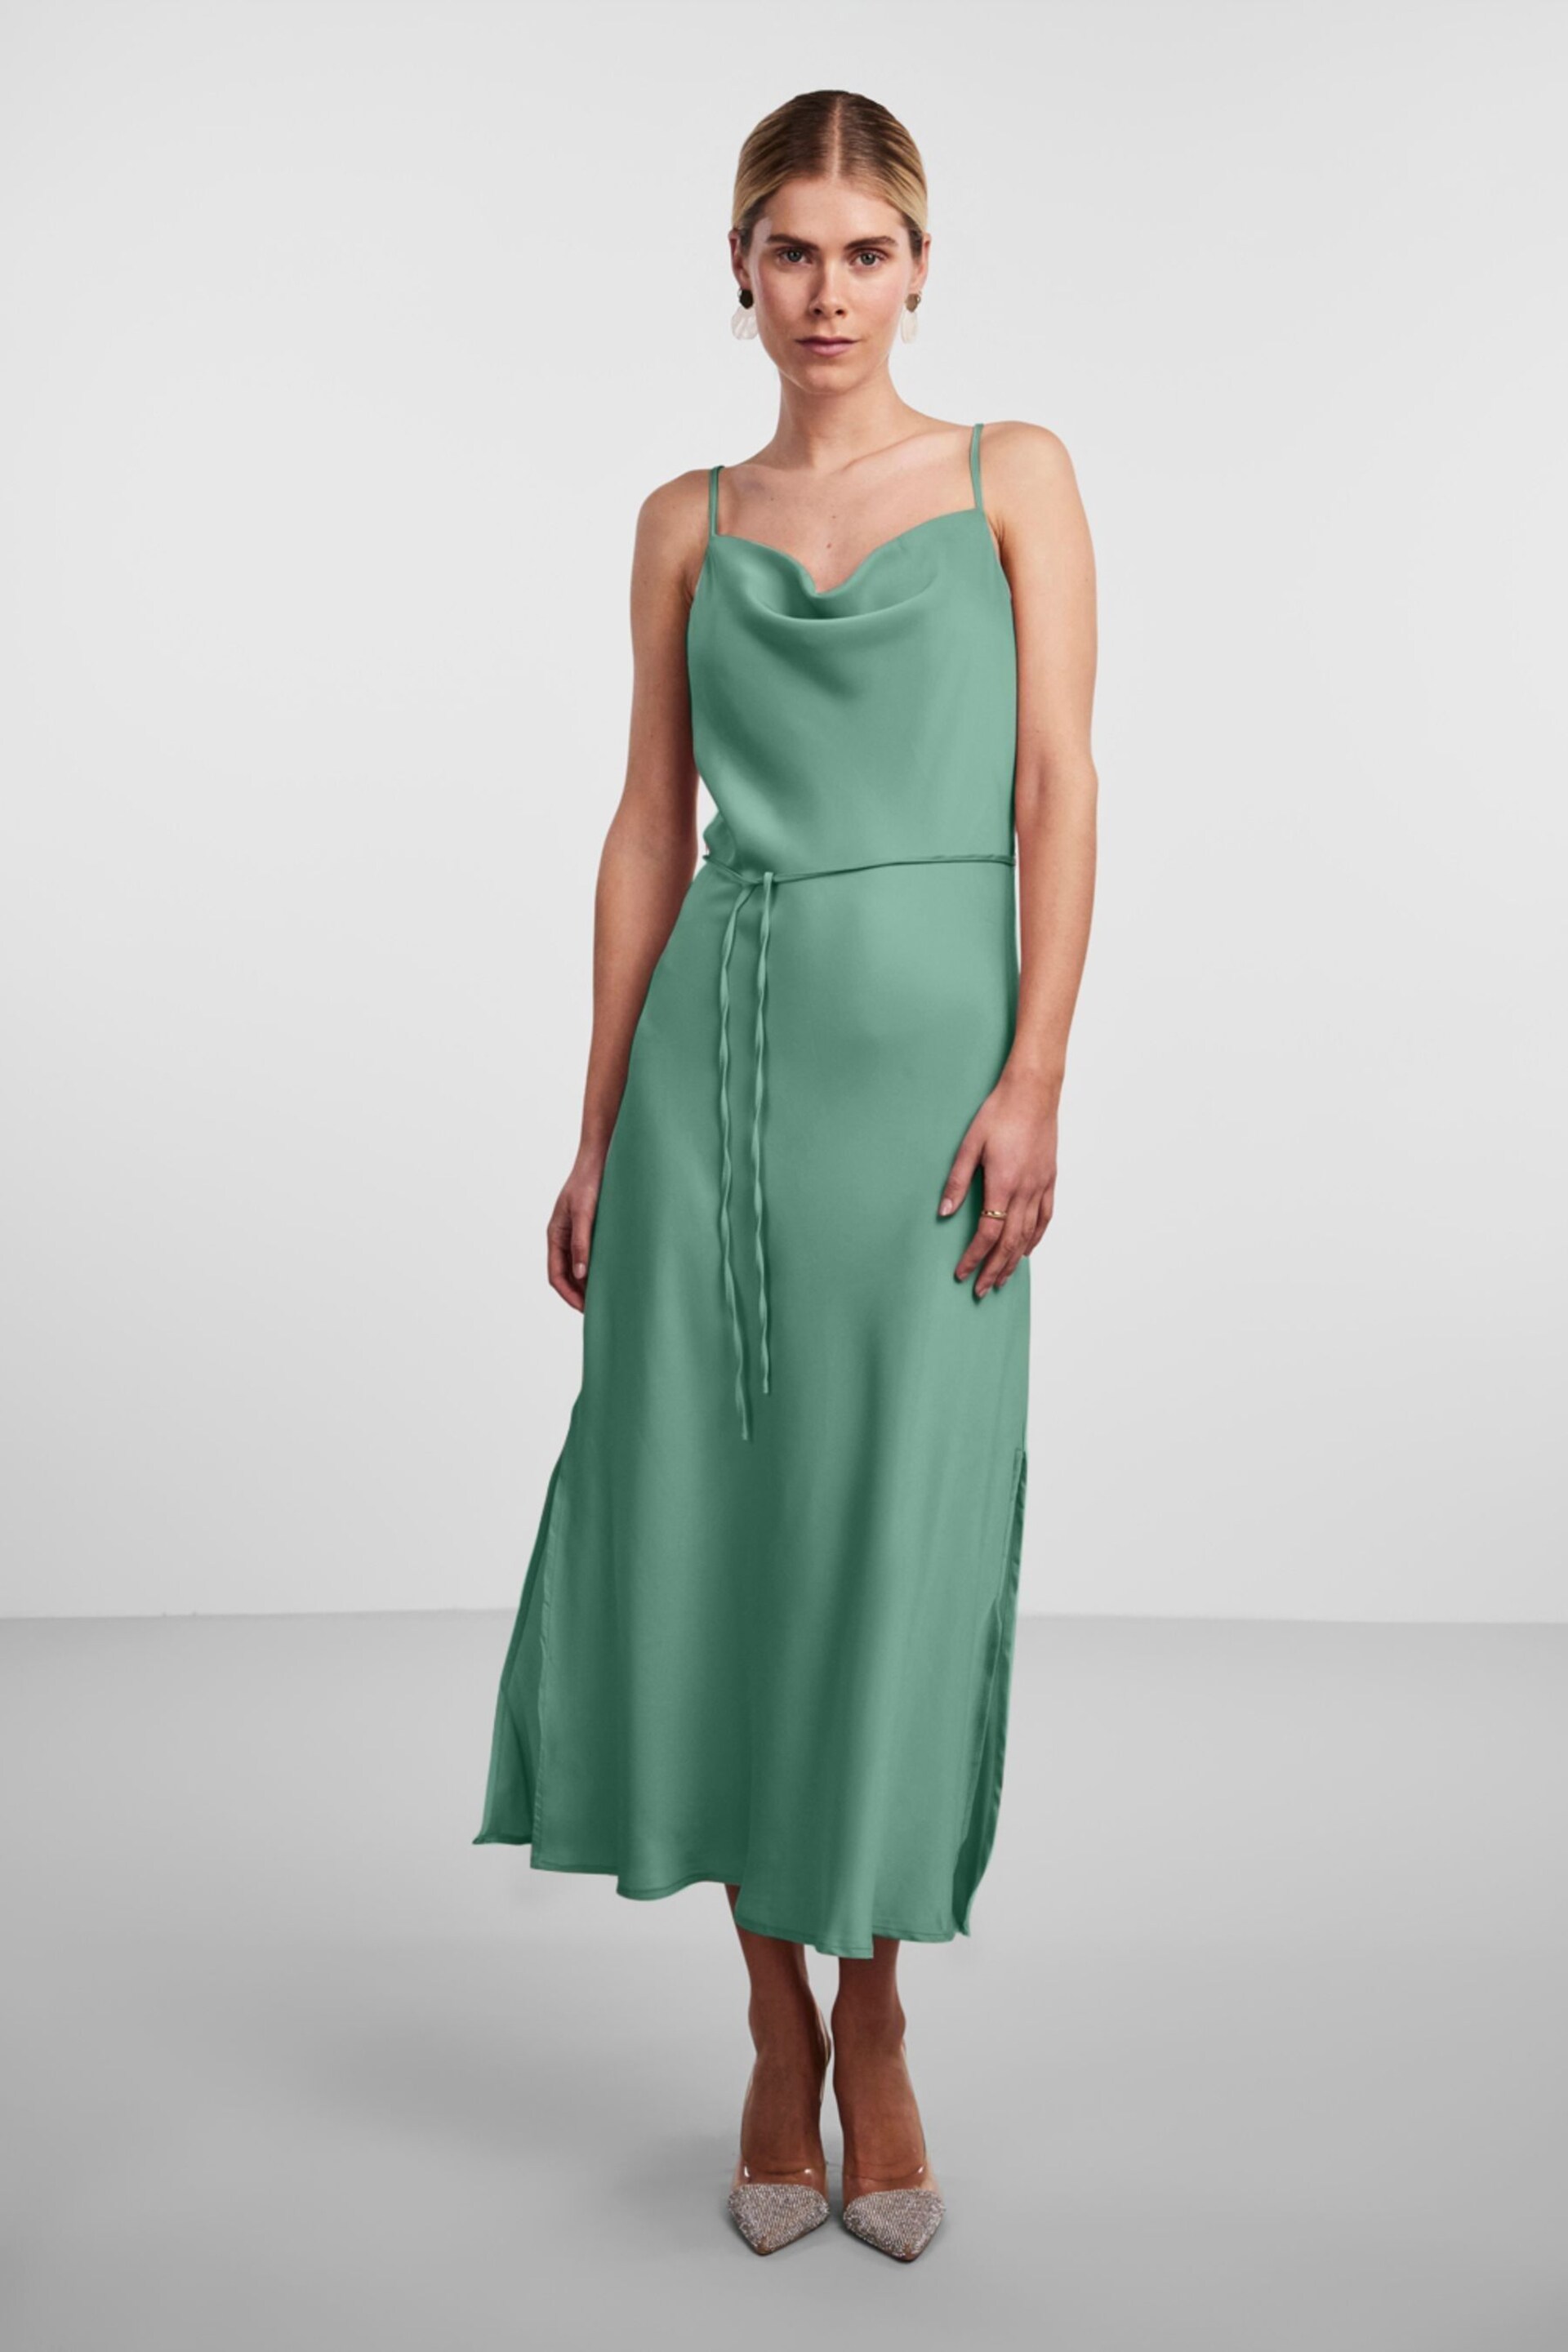 Y.A.S Green Satin Cowl Neck Slip Dress - Image 1 of 5